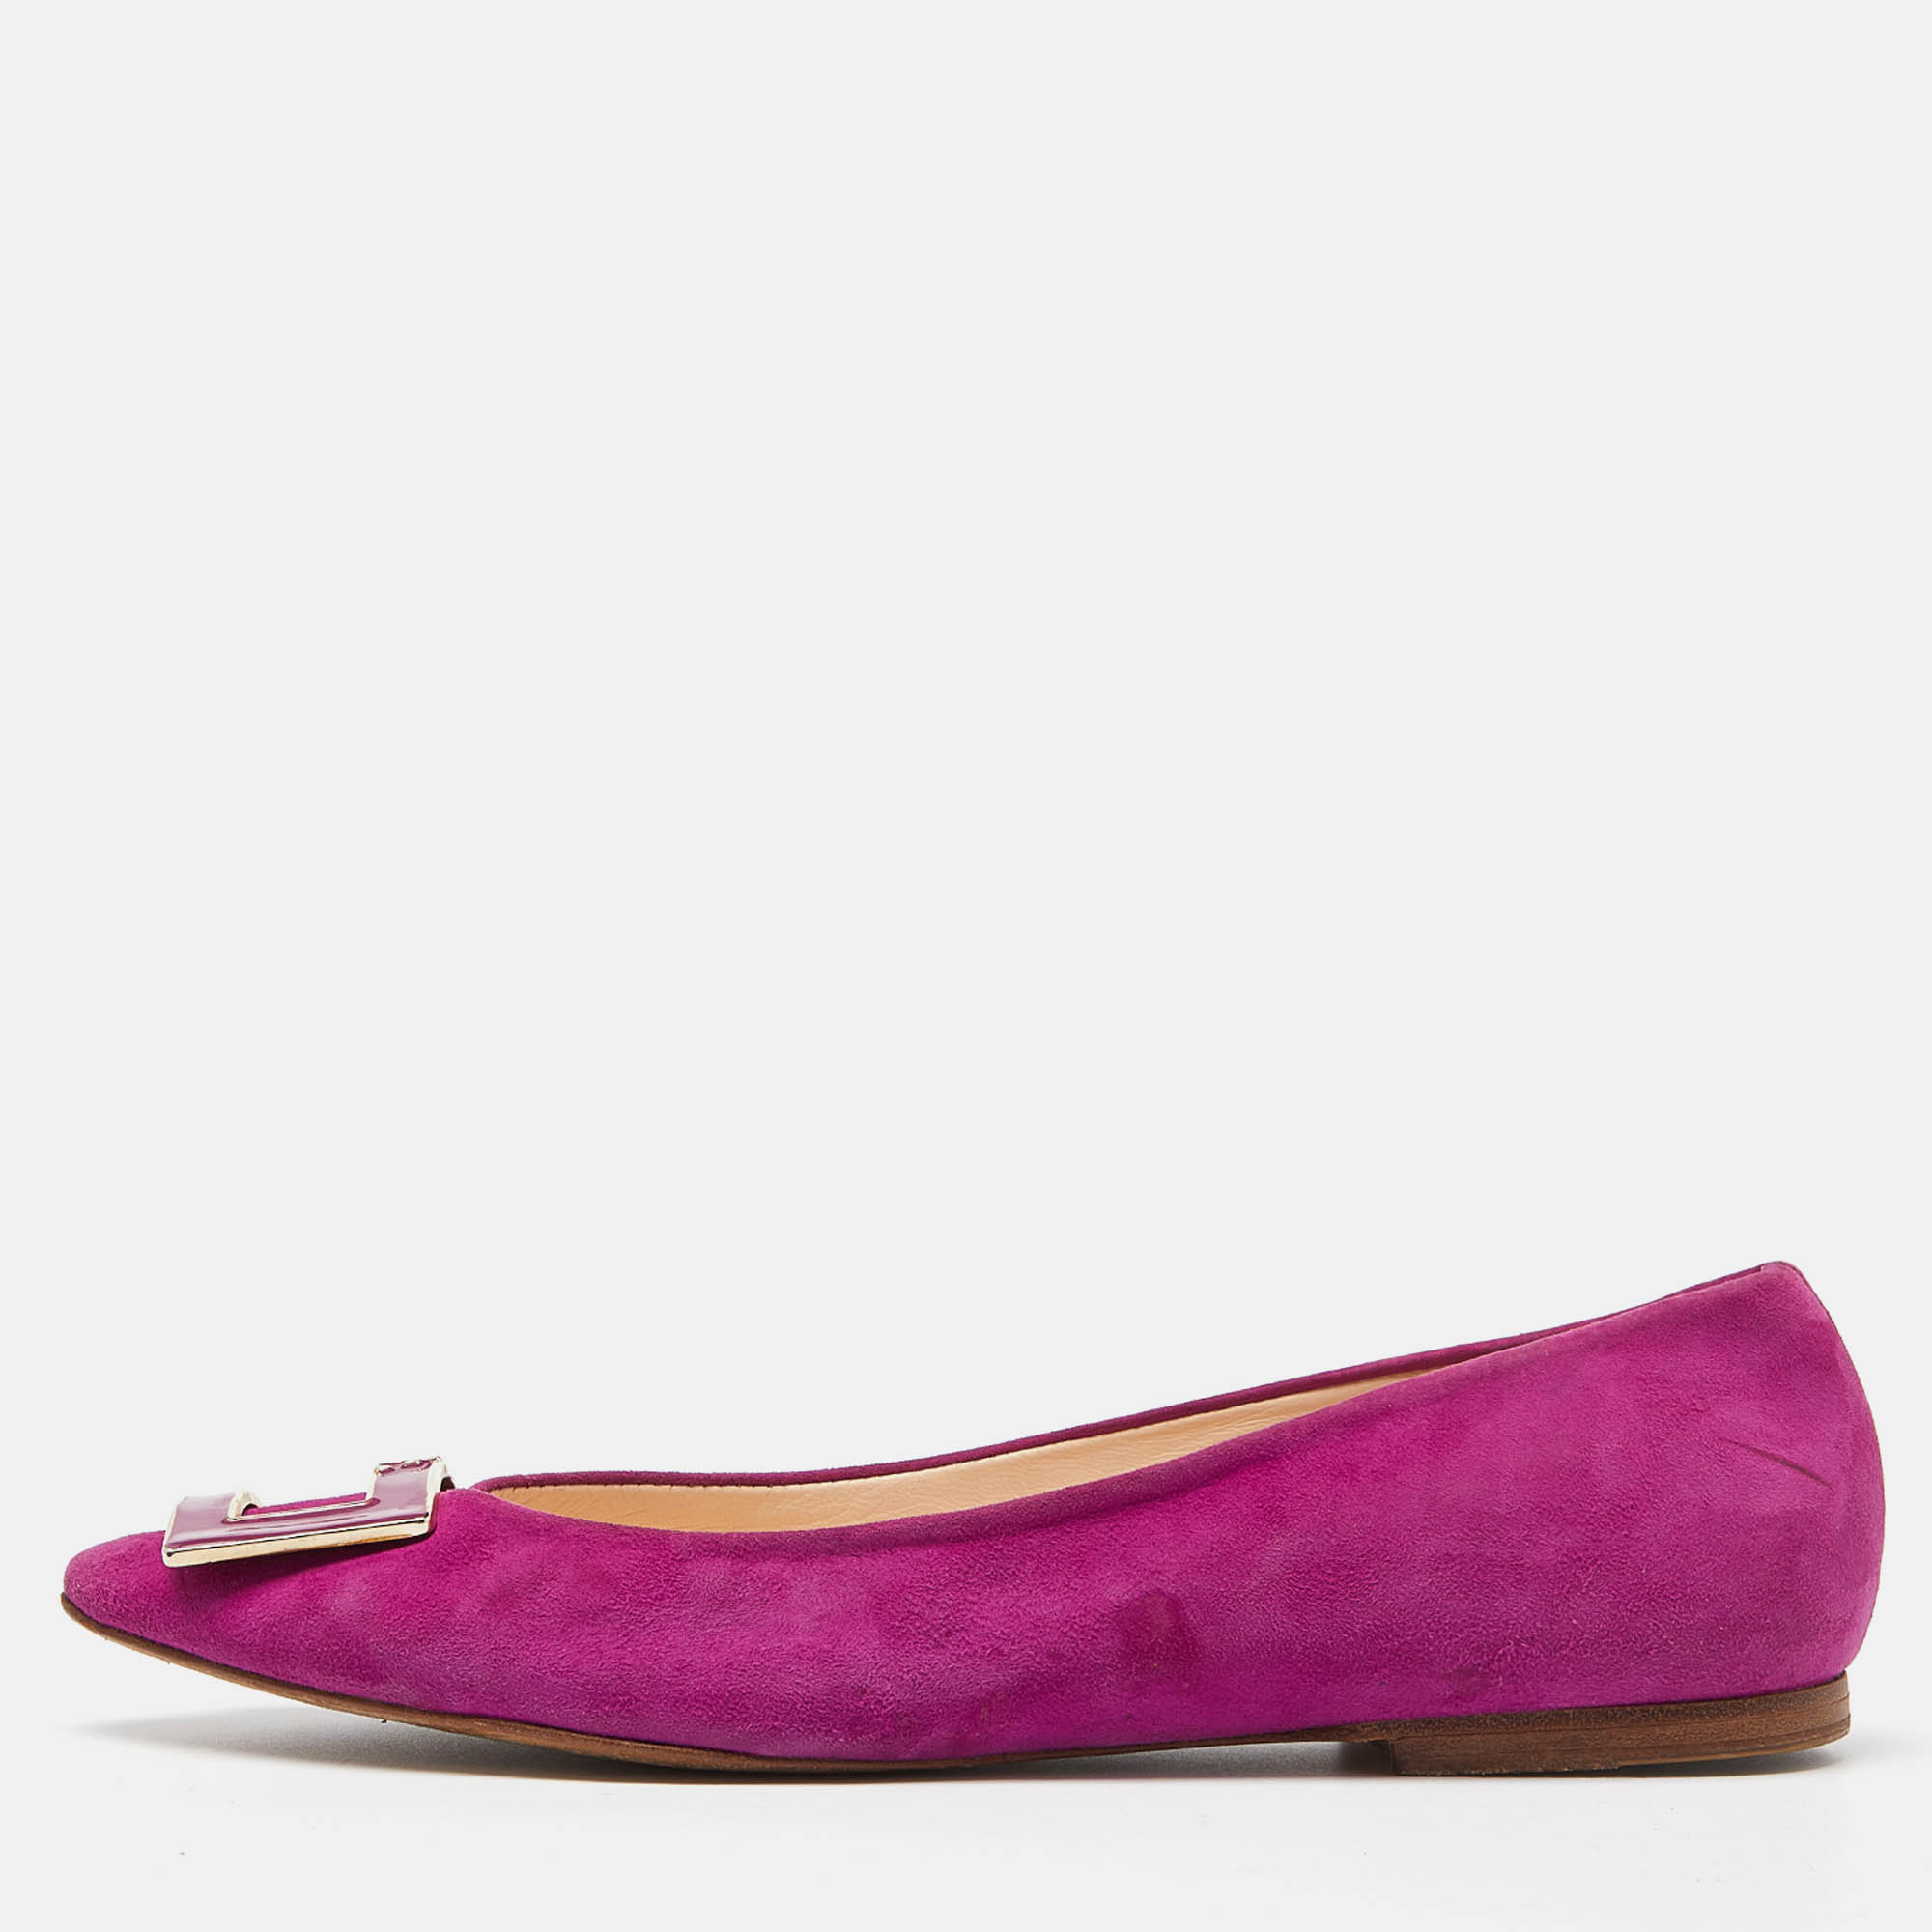 

CH Carolina Herrera Pink Suede Pointed Toe Ballet Flats Size